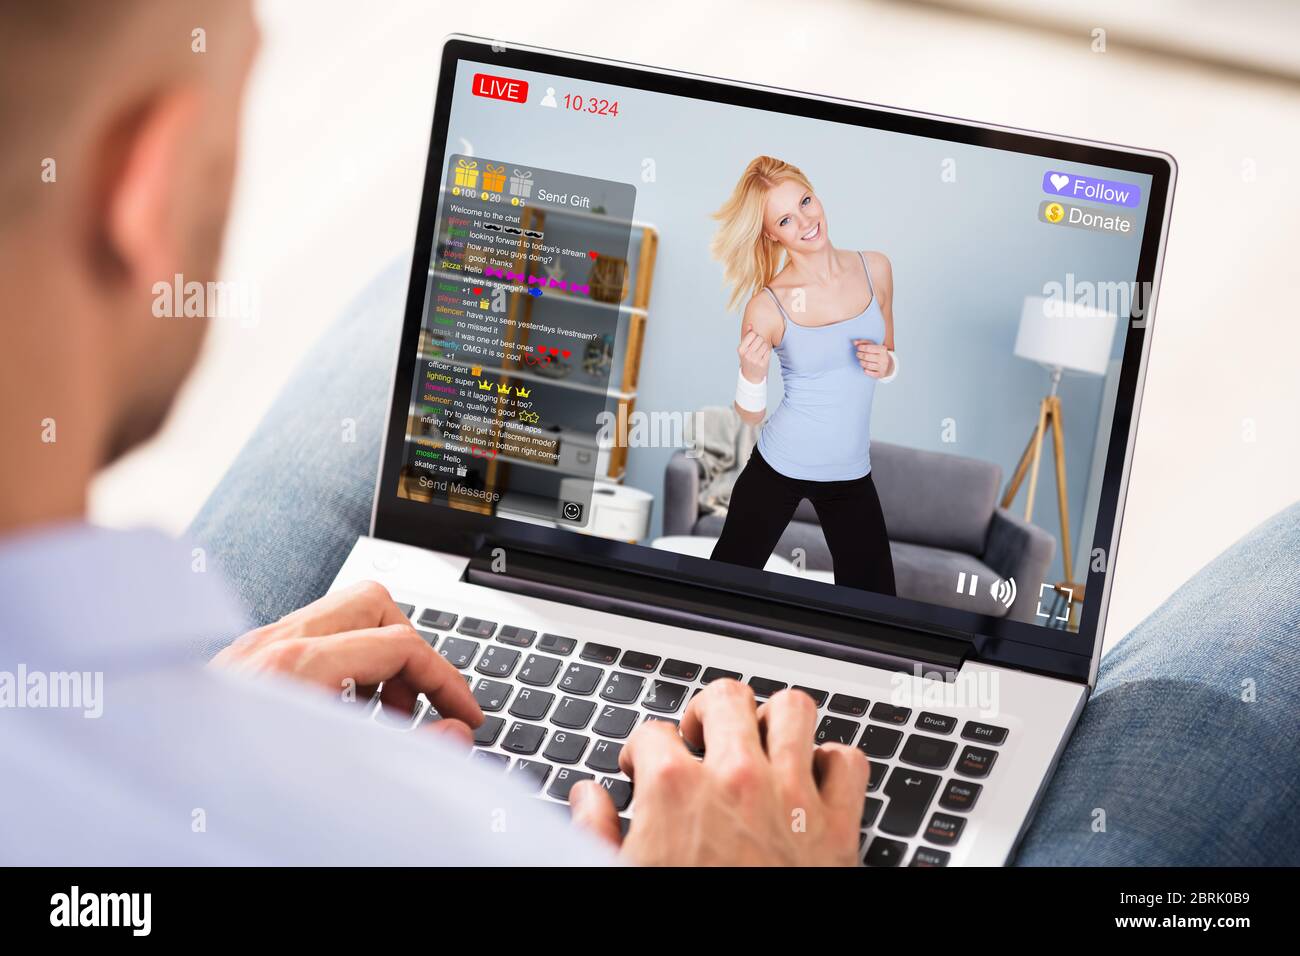 Streaming Live Dancing Video On Laptop Computer Stock Photo